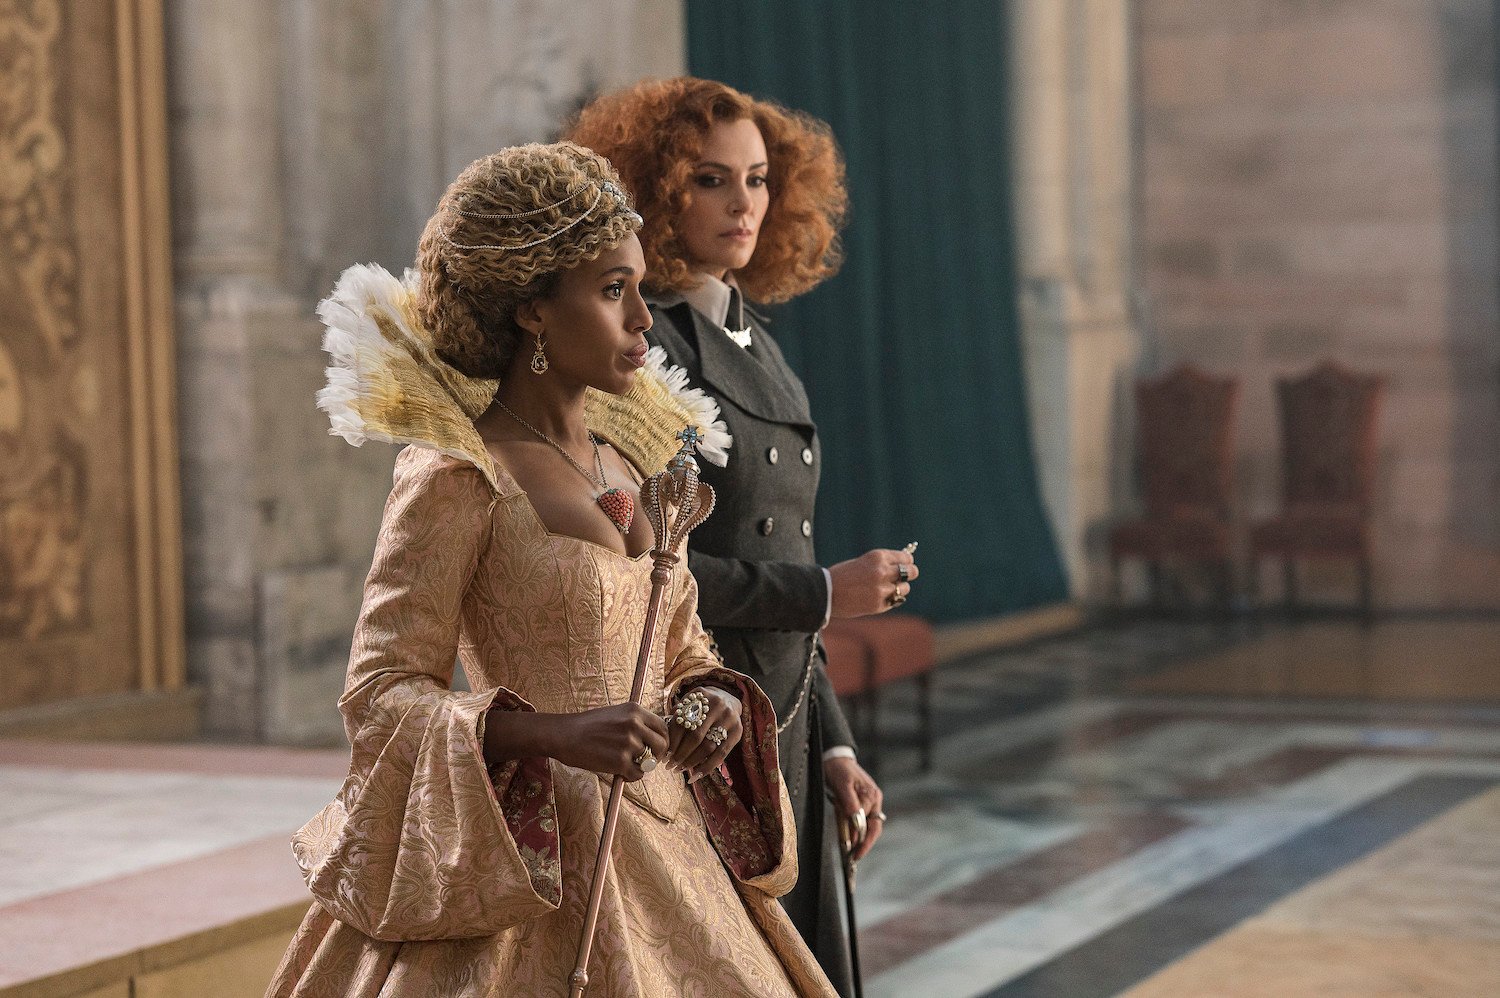 Kerry Washington and Charlize Theron, seen here standing next to one another in a production still, star in 'The School for Good and Evil' which is based on a book series.